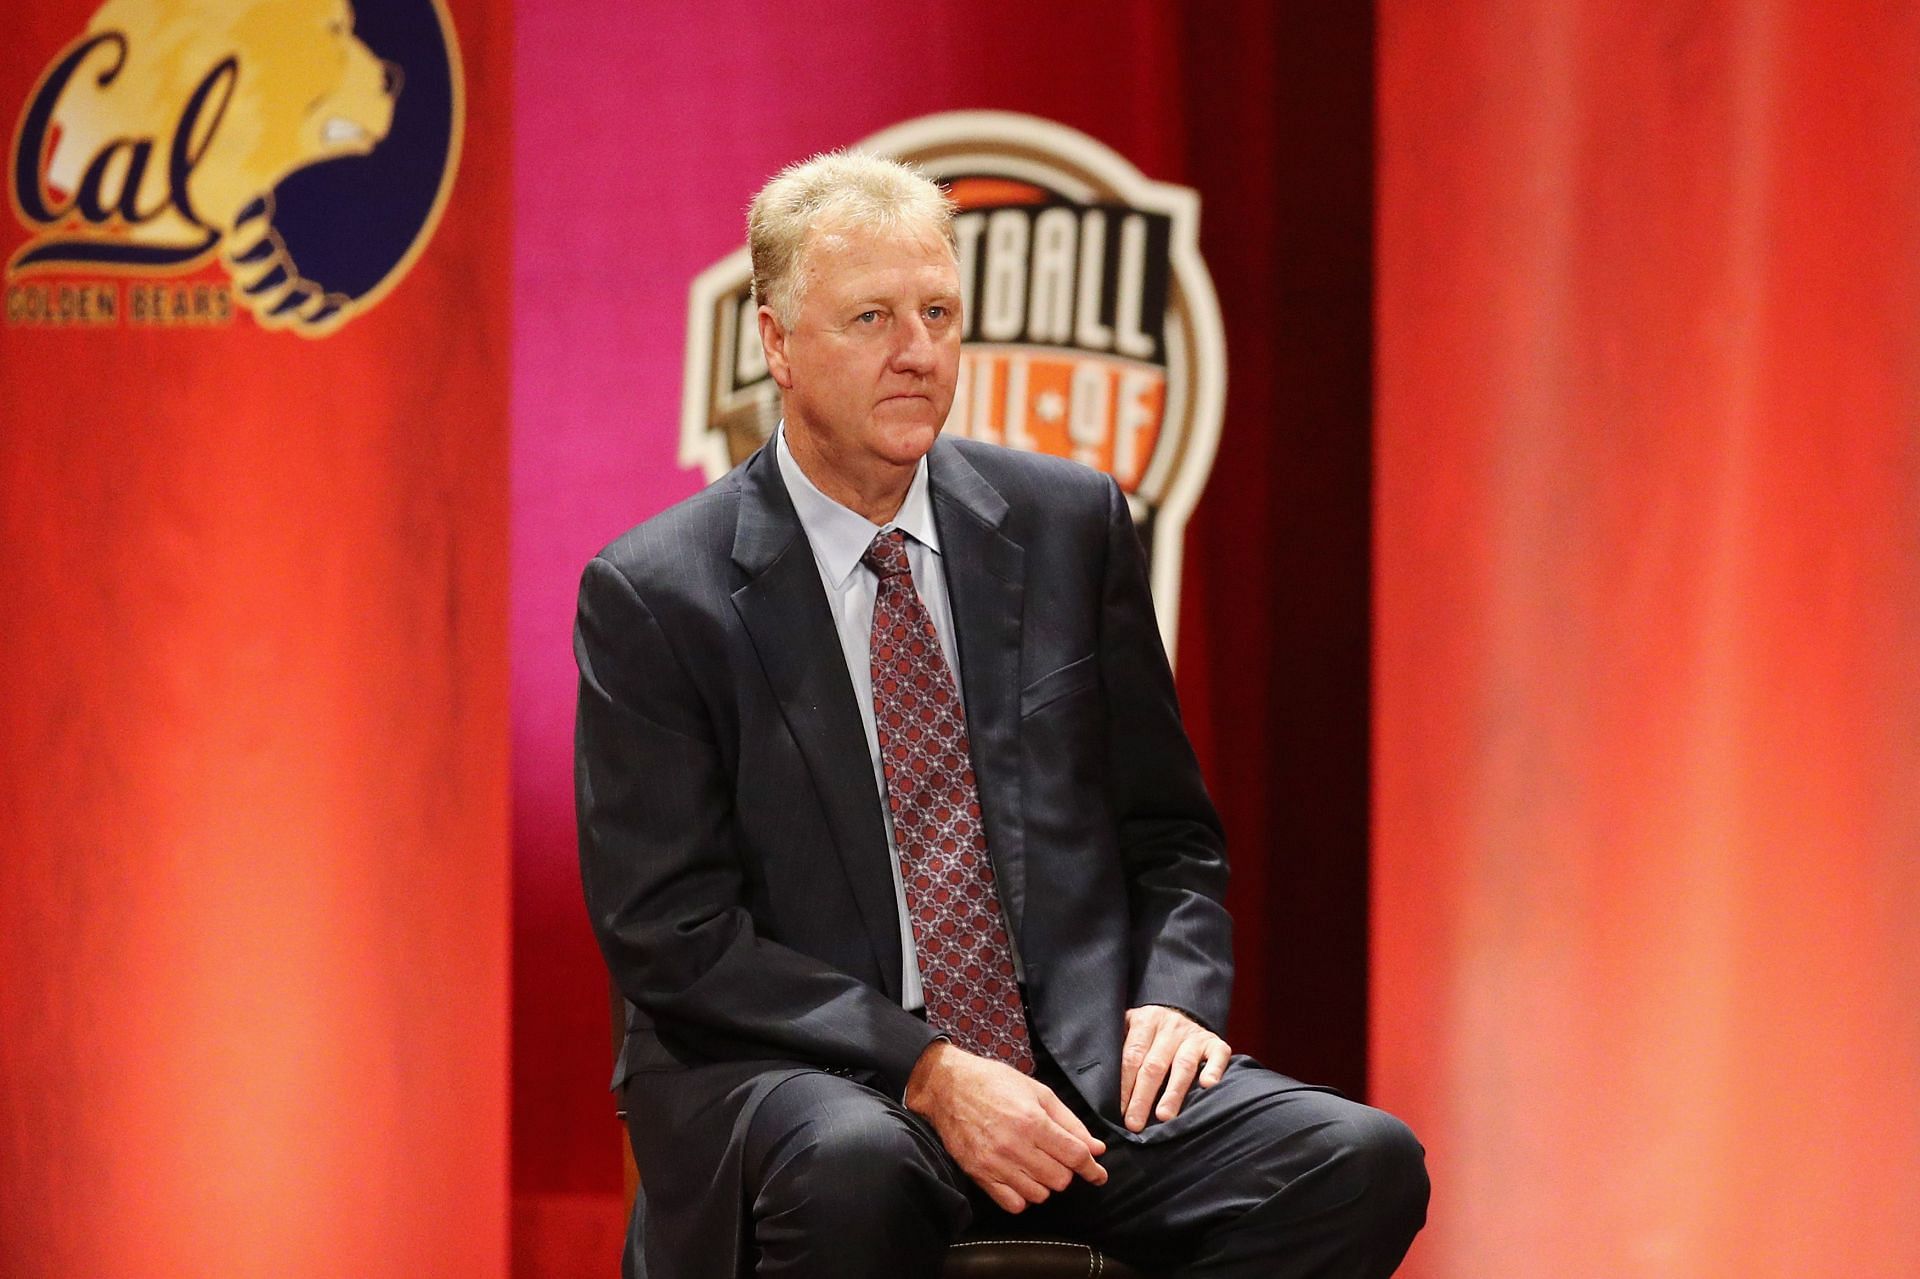 Larry Bird at the 2018 Basketball Hall of Fame Enshrinement Ceremony